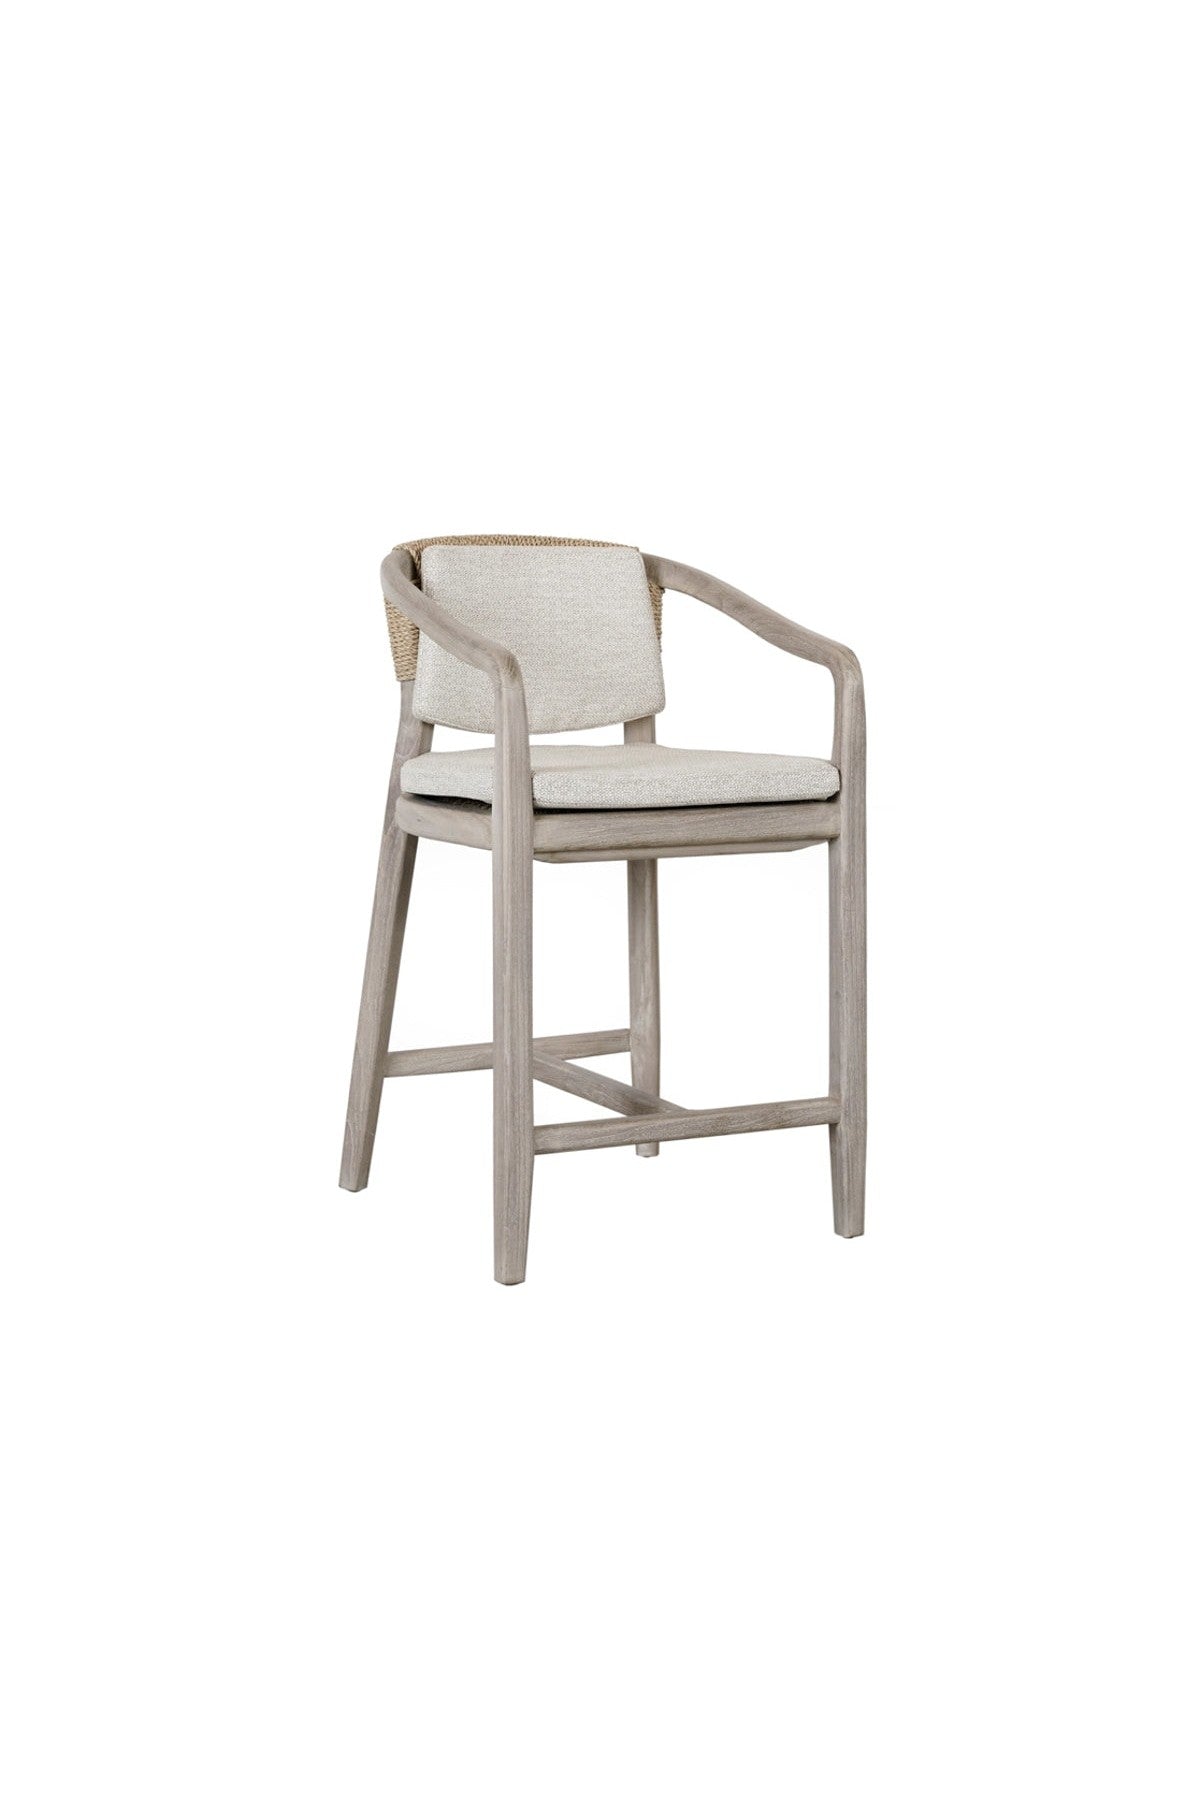 Hanson Outdoor Counter Stool - 2 Colors